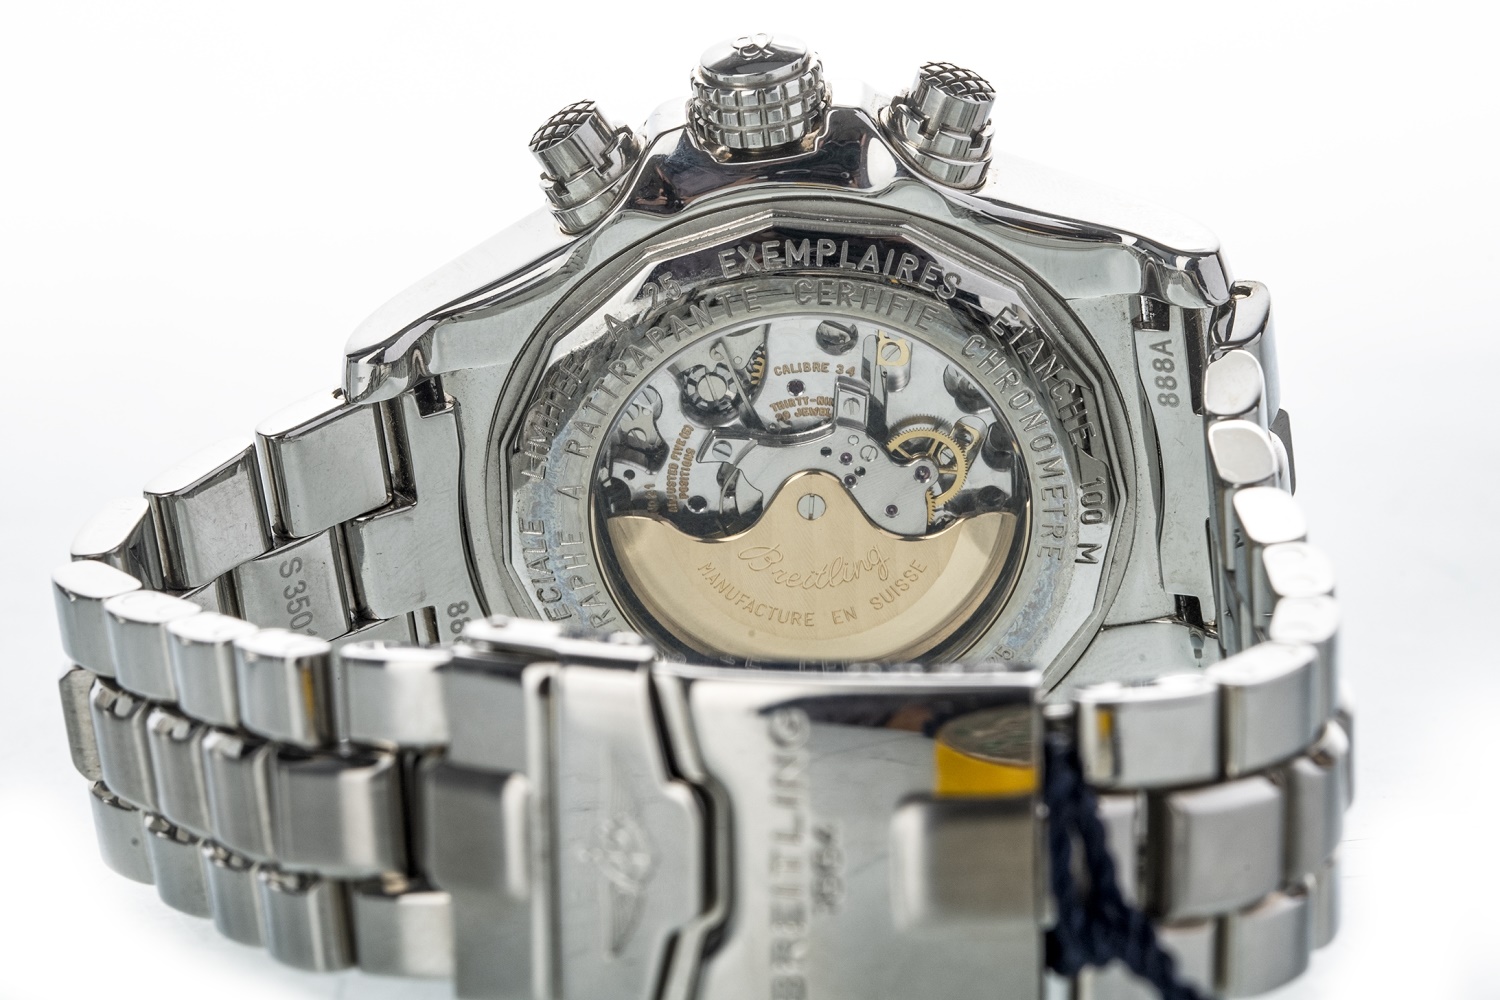 A GENTLEMAN'S BREITLING CHRONOGRAPH RATTRAPANTE STAINLESS STEEL AUTOMATIC WRIST WATCH - Image 3 of 4